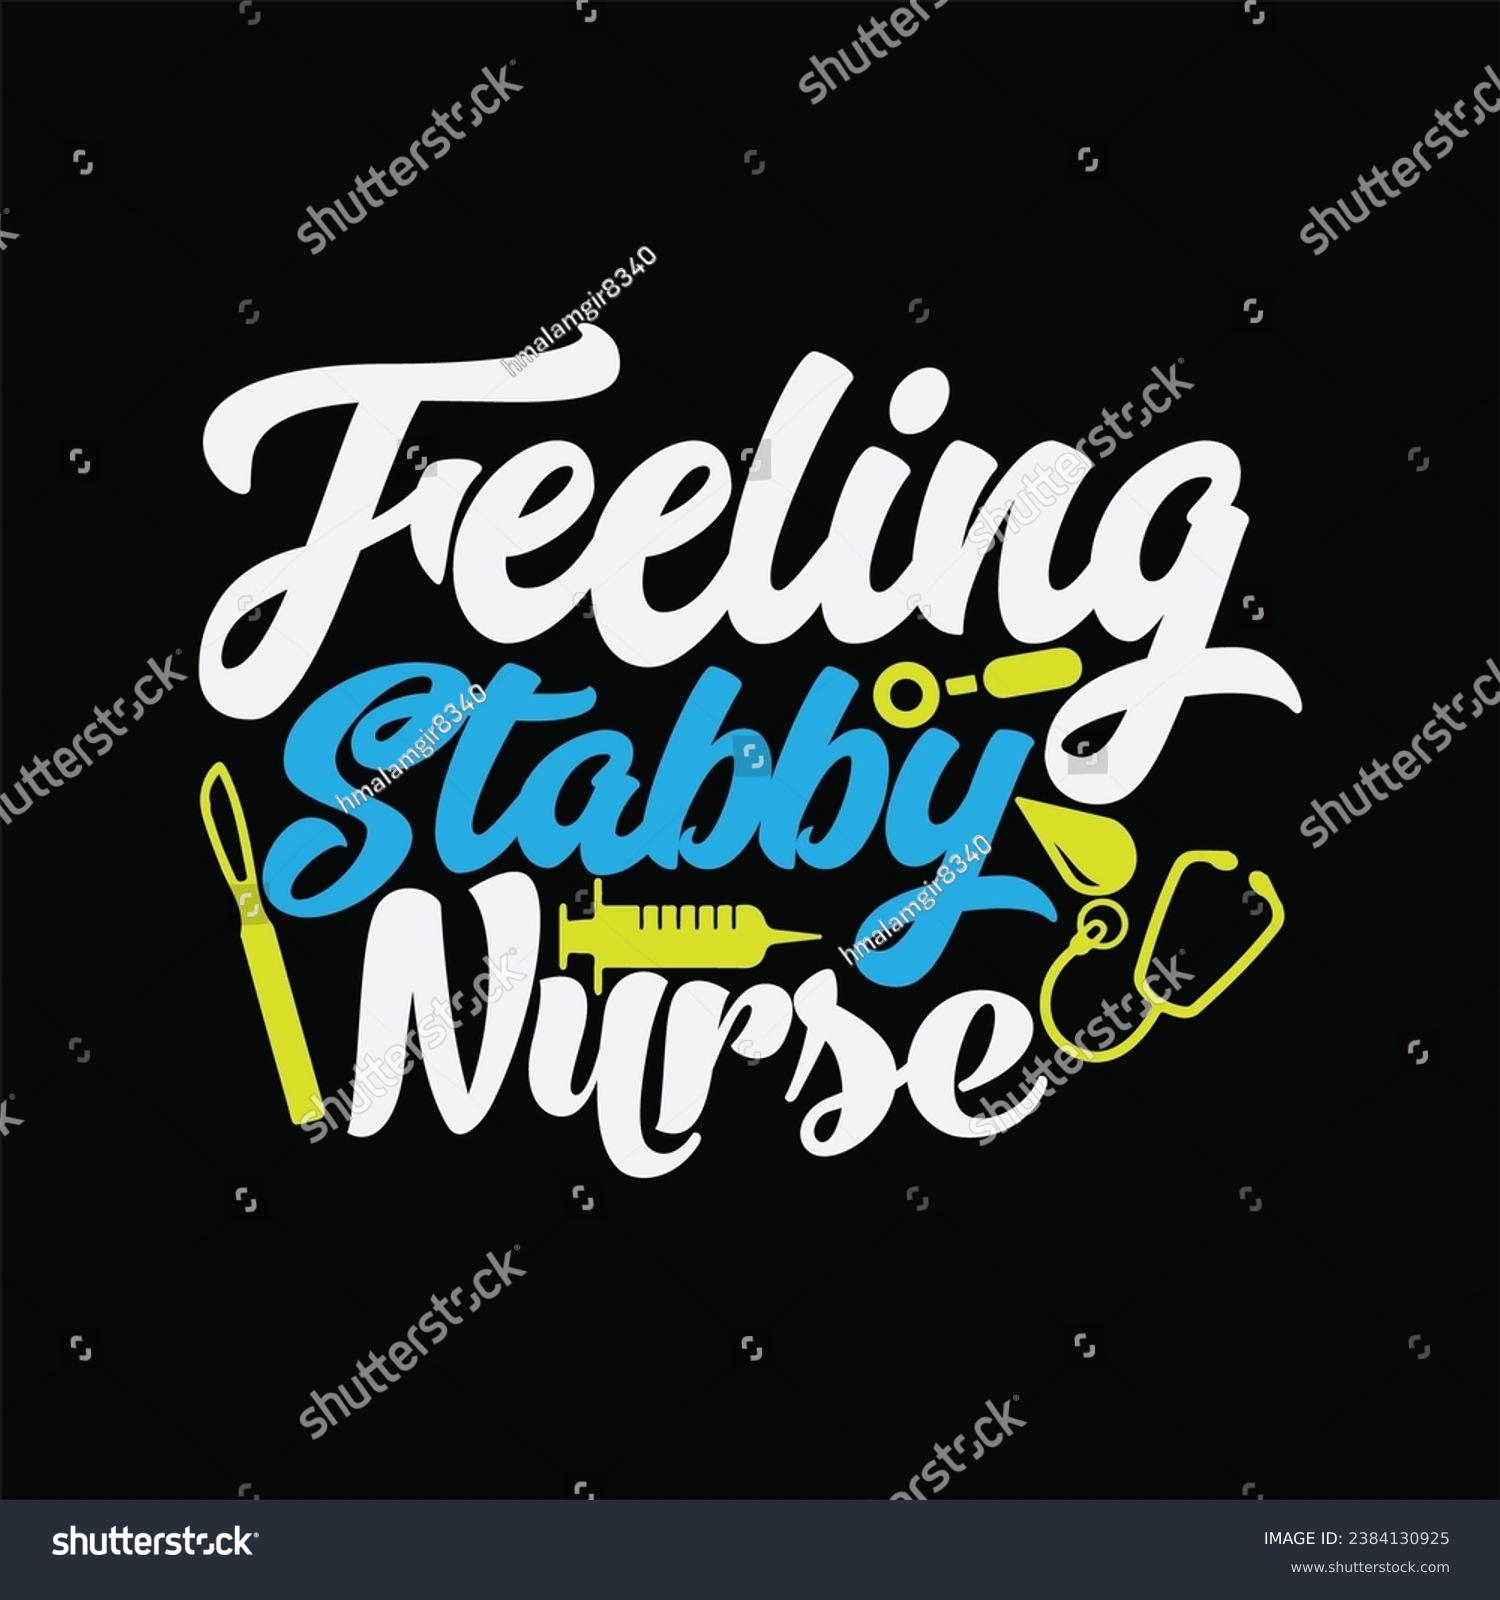 SVG of Feeling Stabby Nurse 1 t-shirt design. Here You Can find and Buy t-Shirt Design. Digital Files for yourself, friends and family, or anyone who supports your Special Day and Occasions. svg